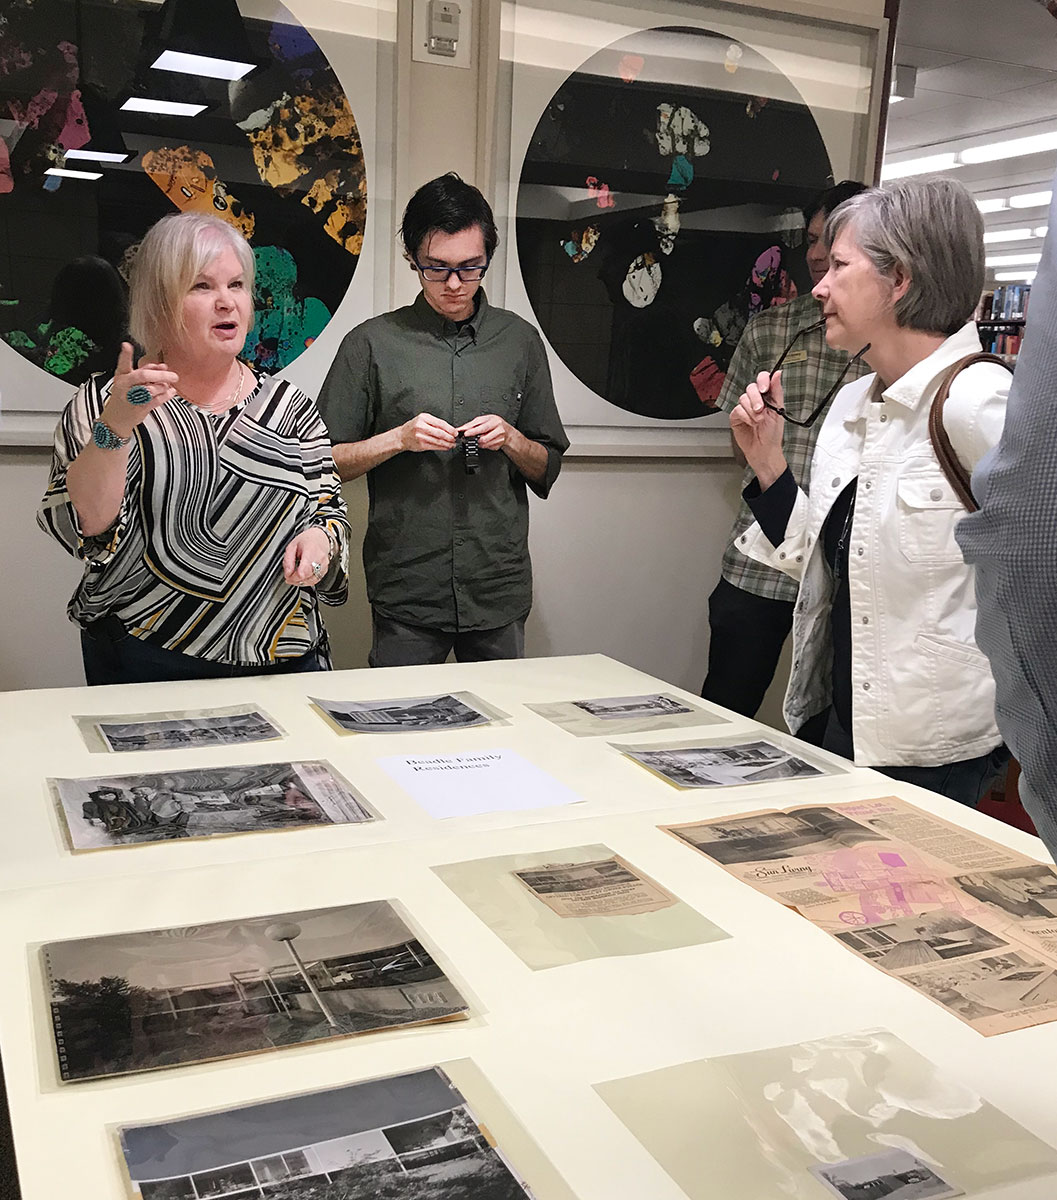 Al Beadle Collection at ASU Library for Modern Phoenix Week 2019